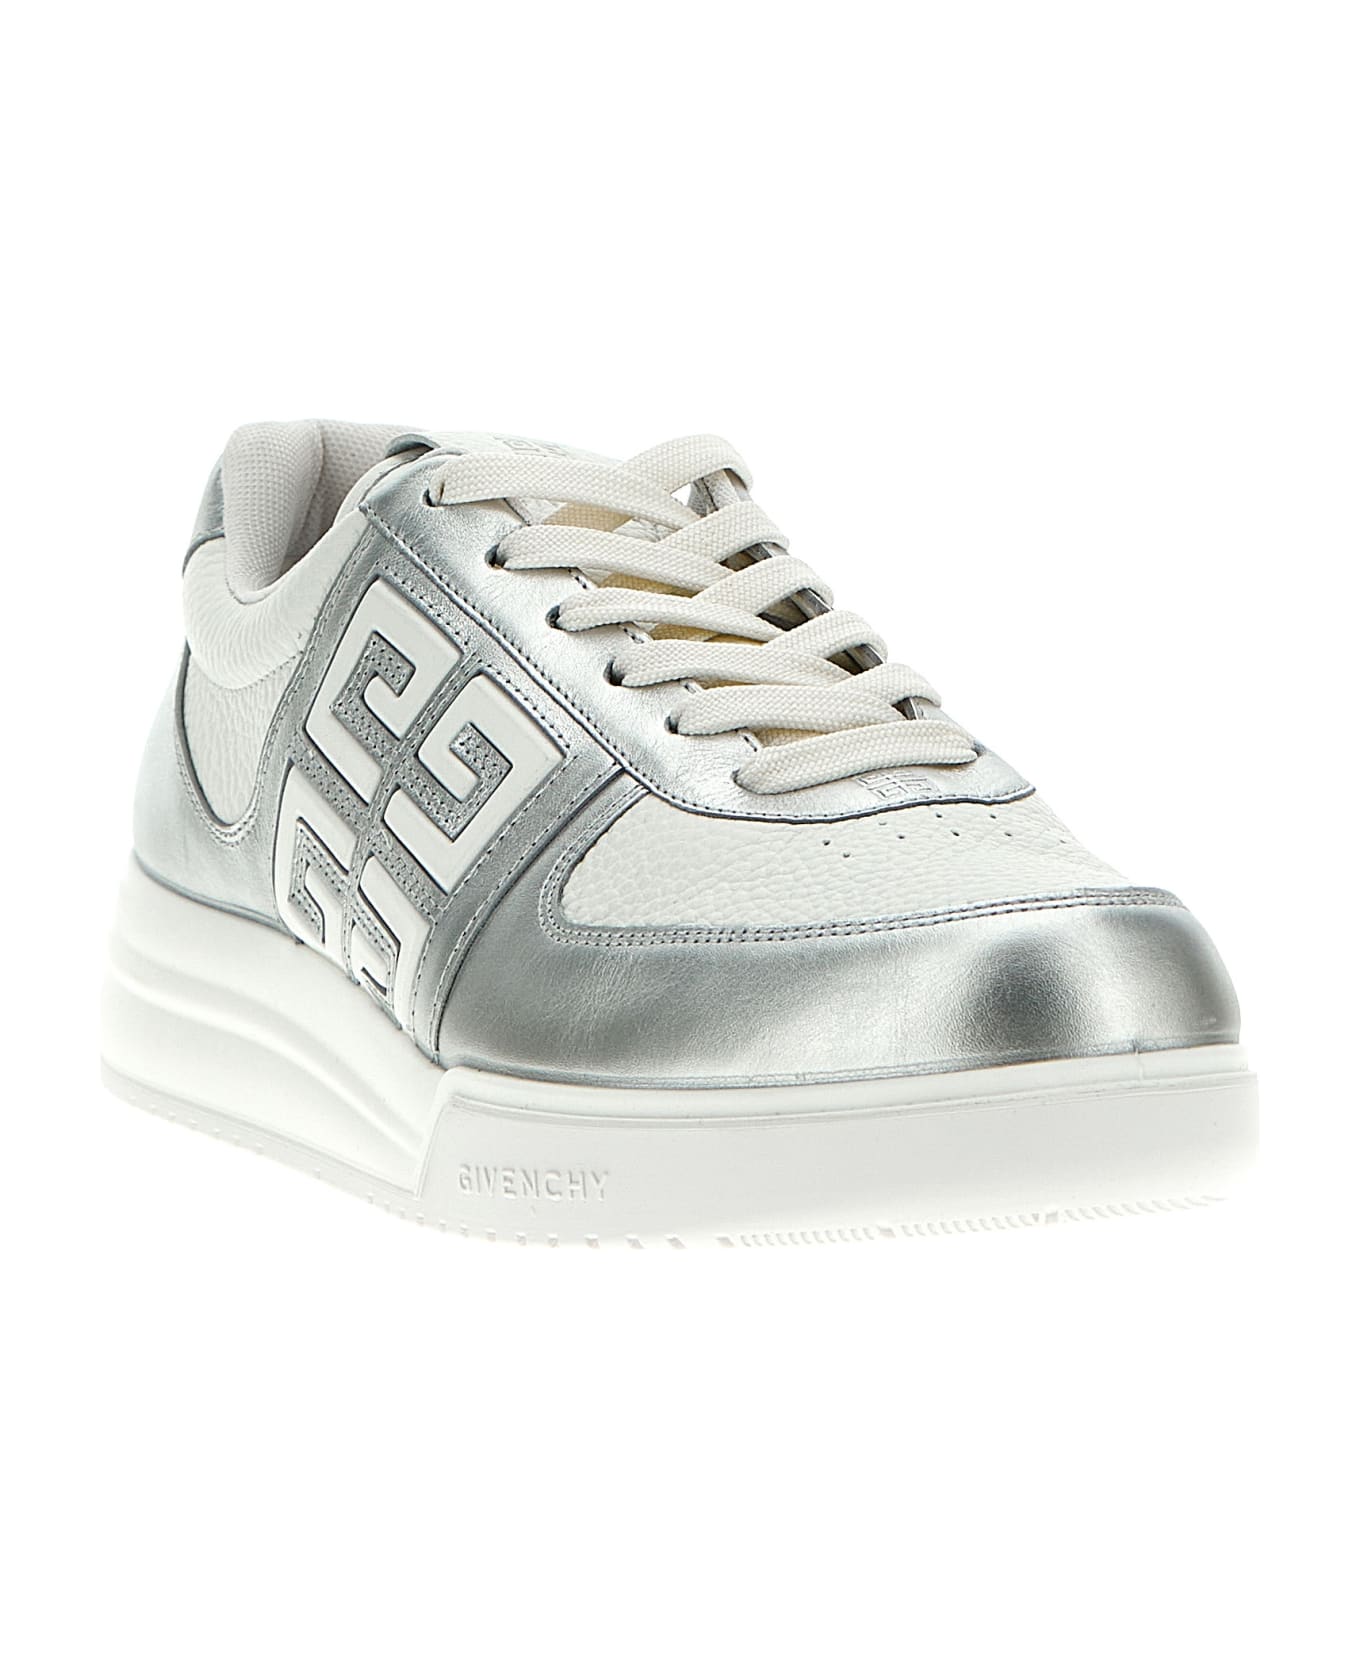 Givenchy G4 Low-top Sneaker - SILVER スニーカー